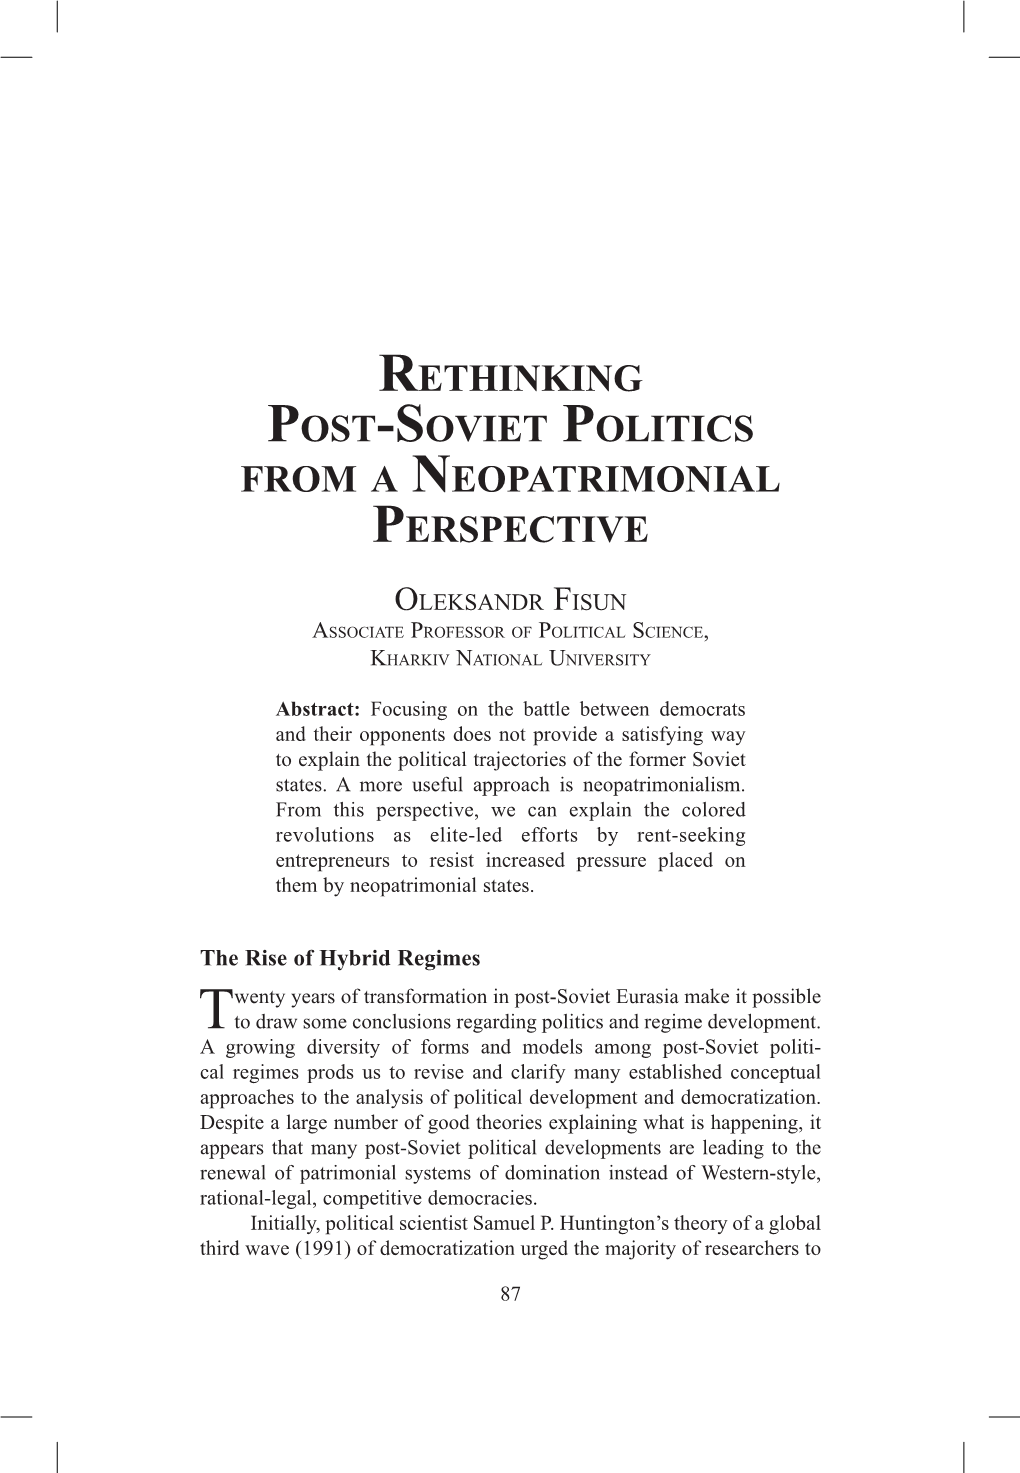 Rethinking Post-Soviet Politics from a Neopatrimonial Perspective